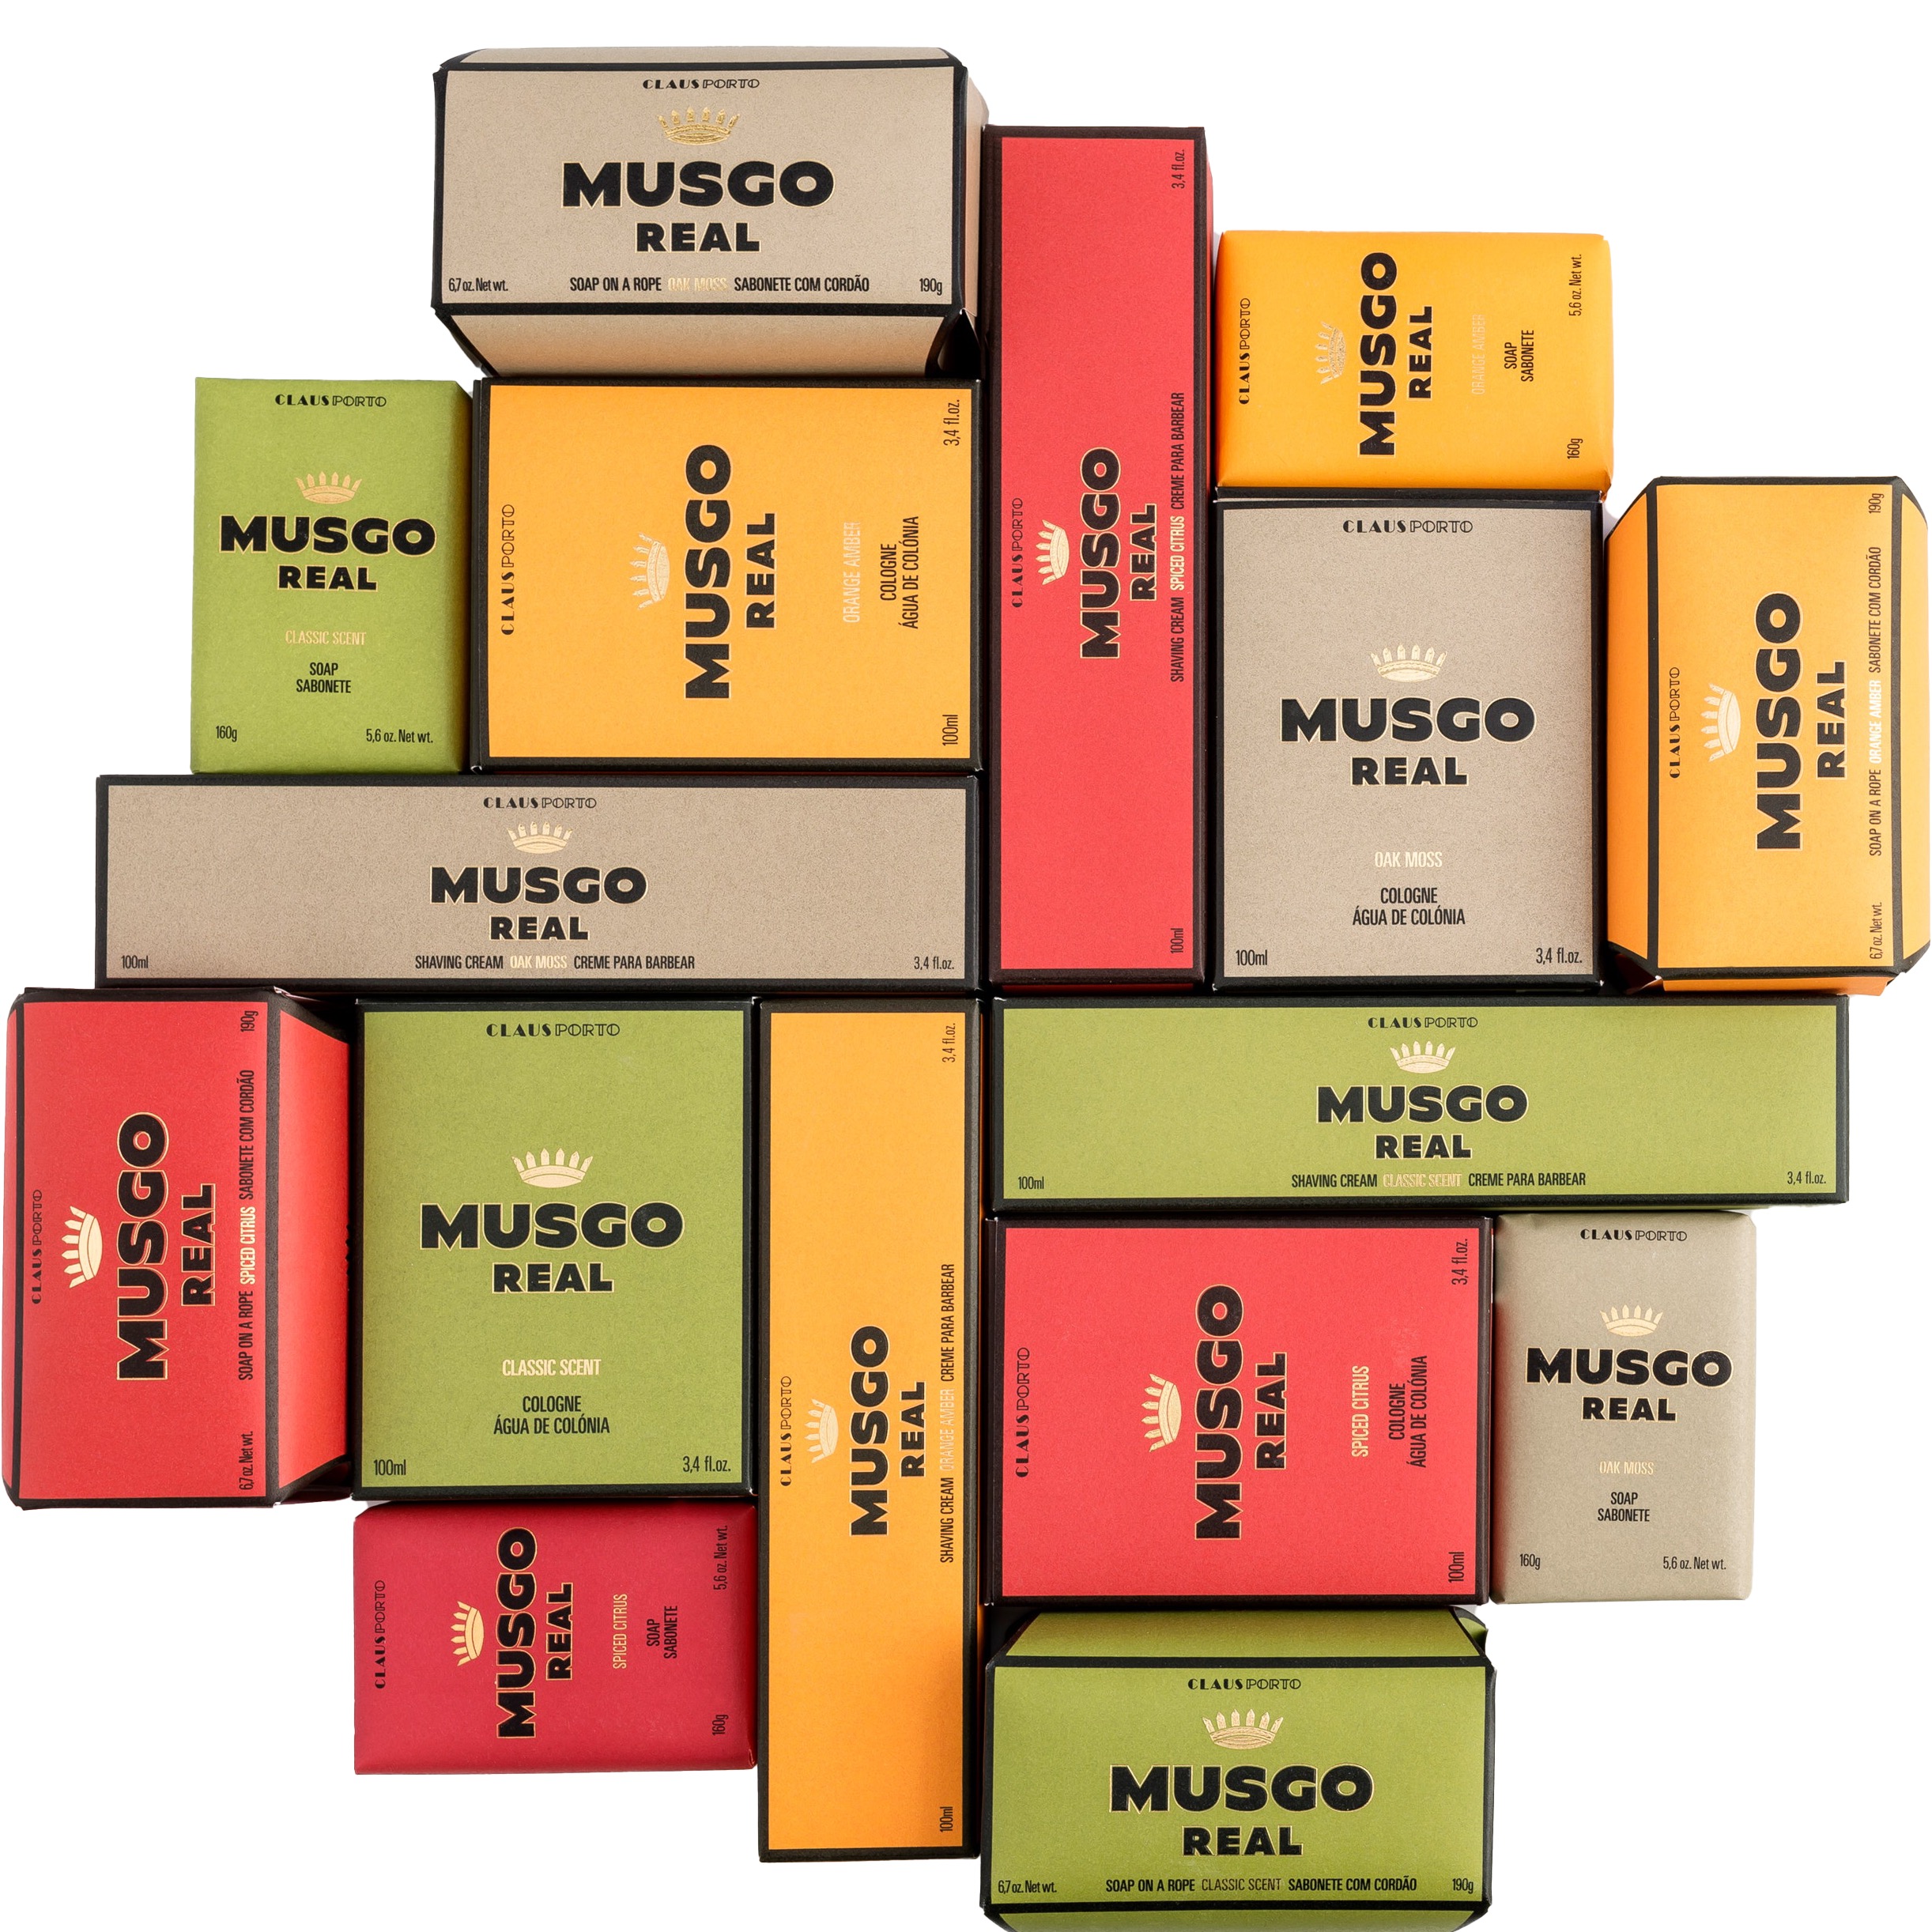 Musgo Real Body Soap Classic scent 160gr - 3.2 - MR-199EXP